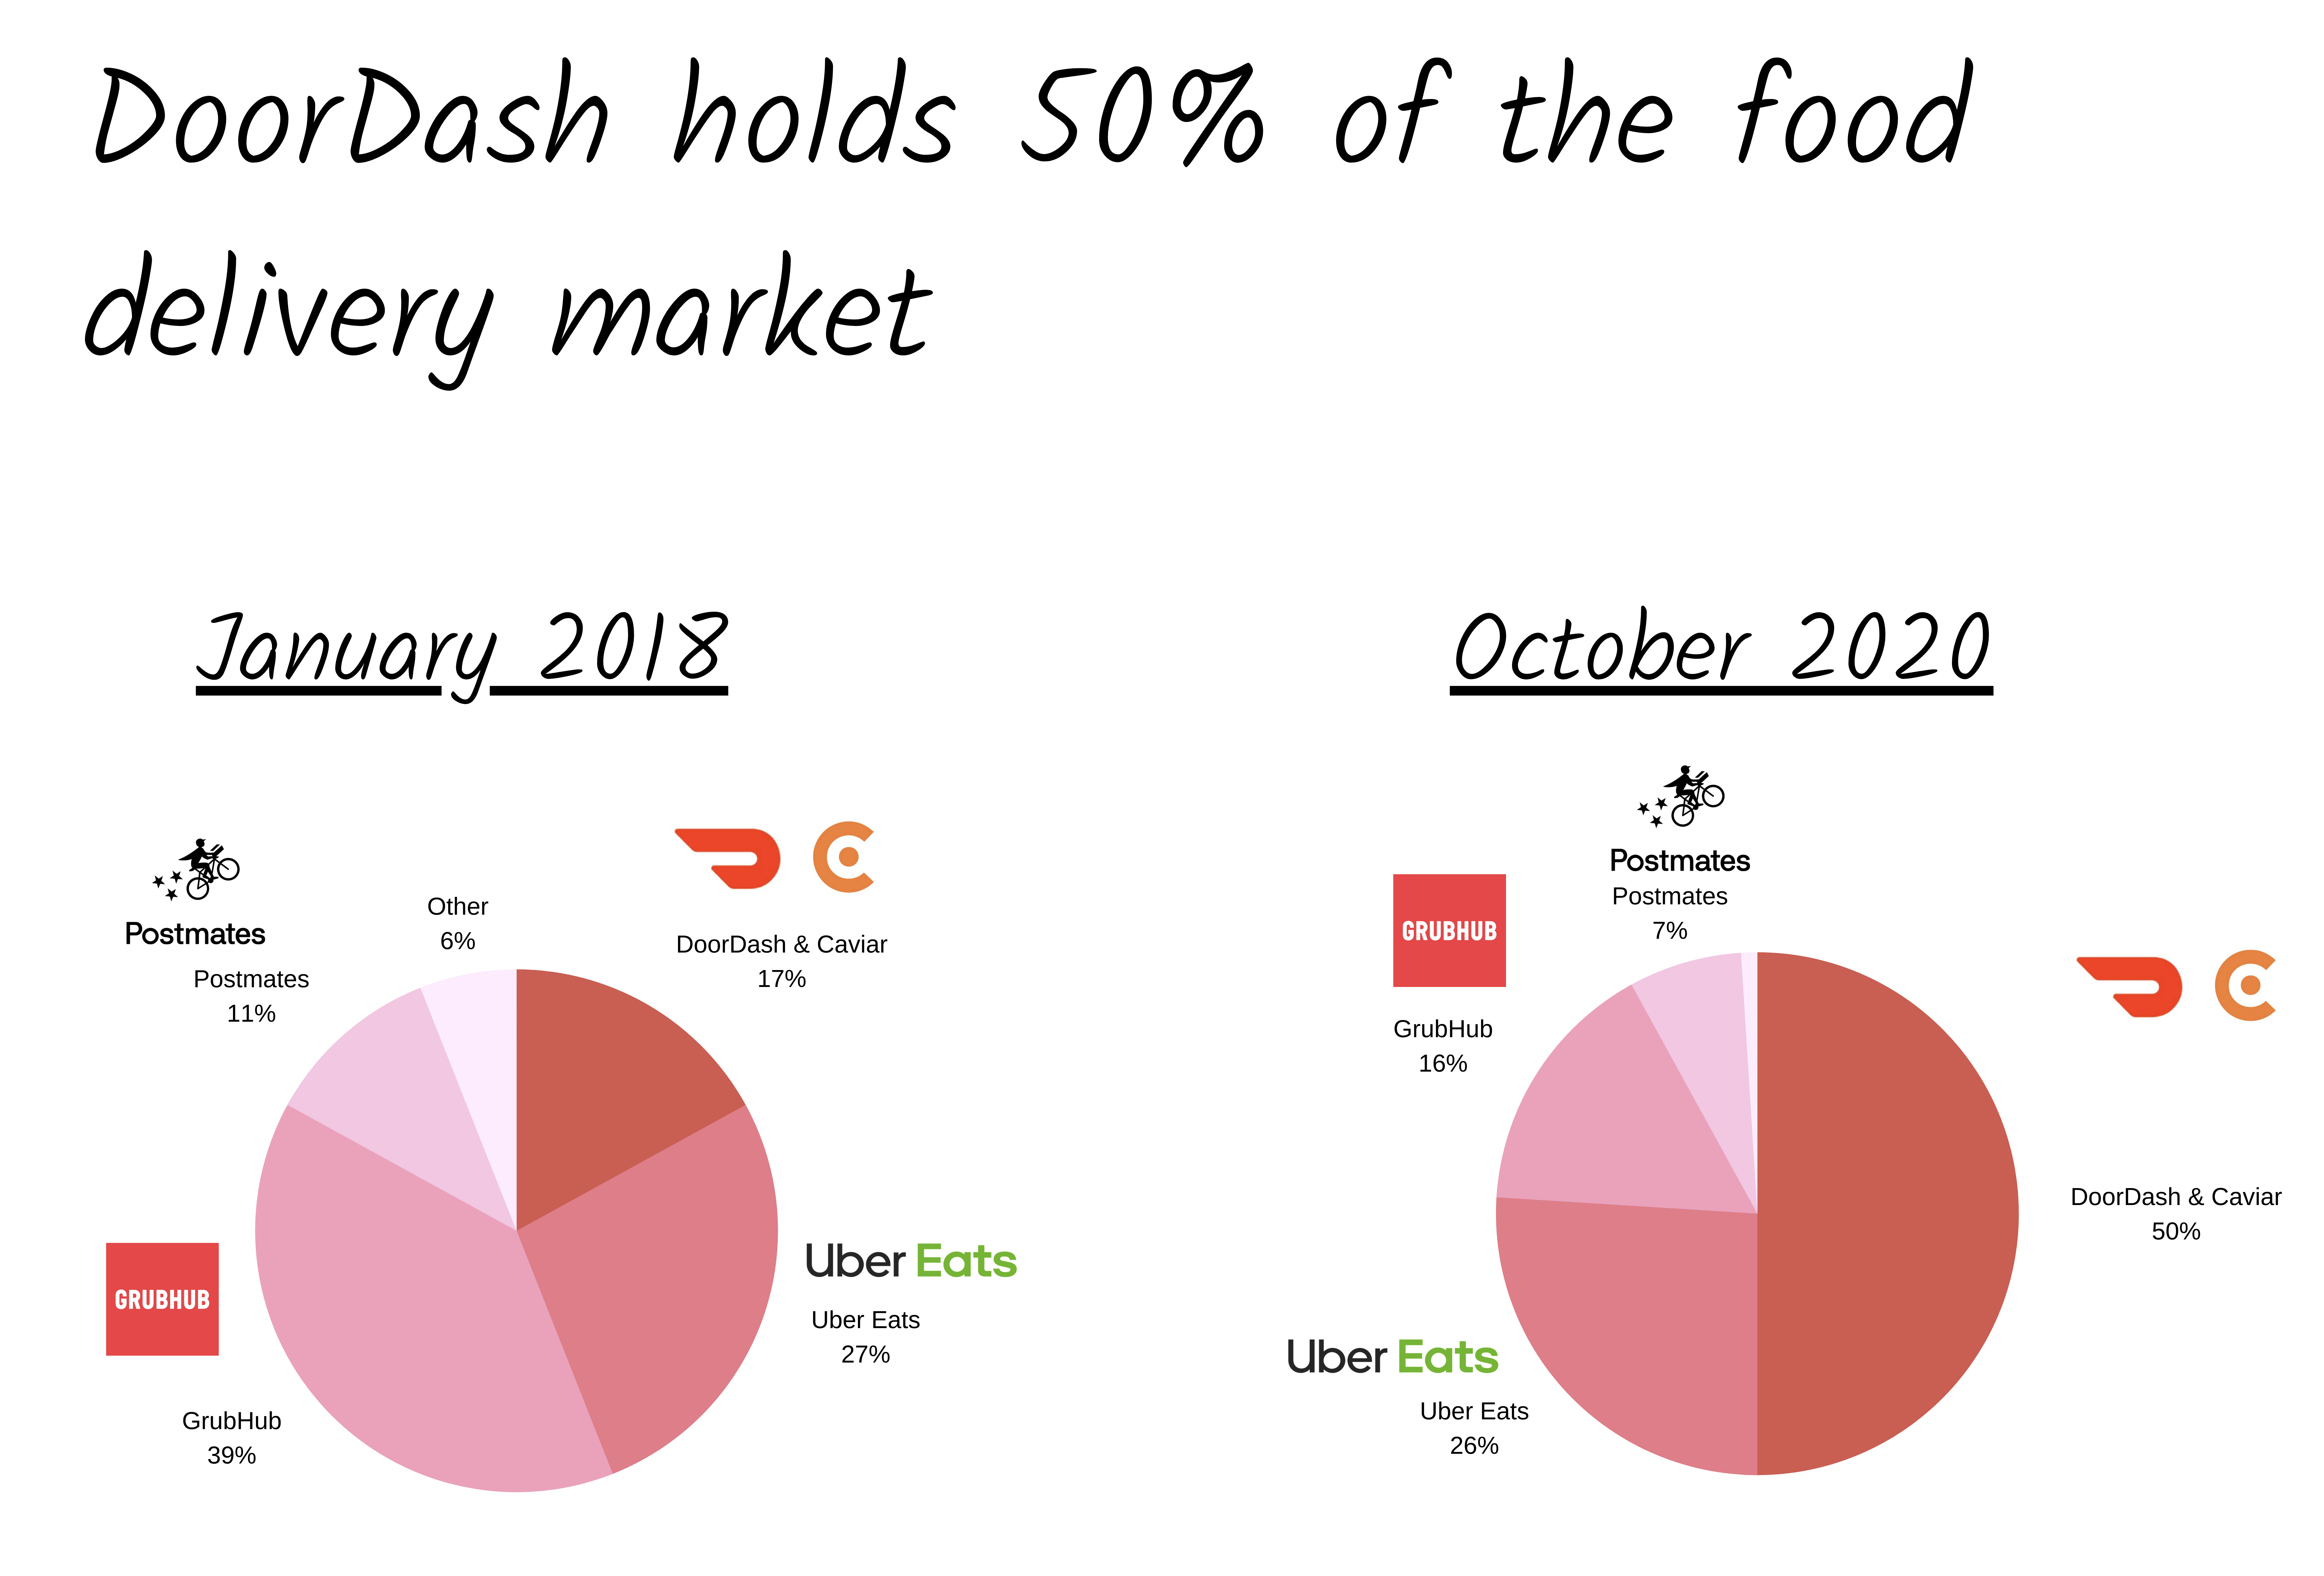 New DoorDash pricing tiers offer commission rates starting at 15%